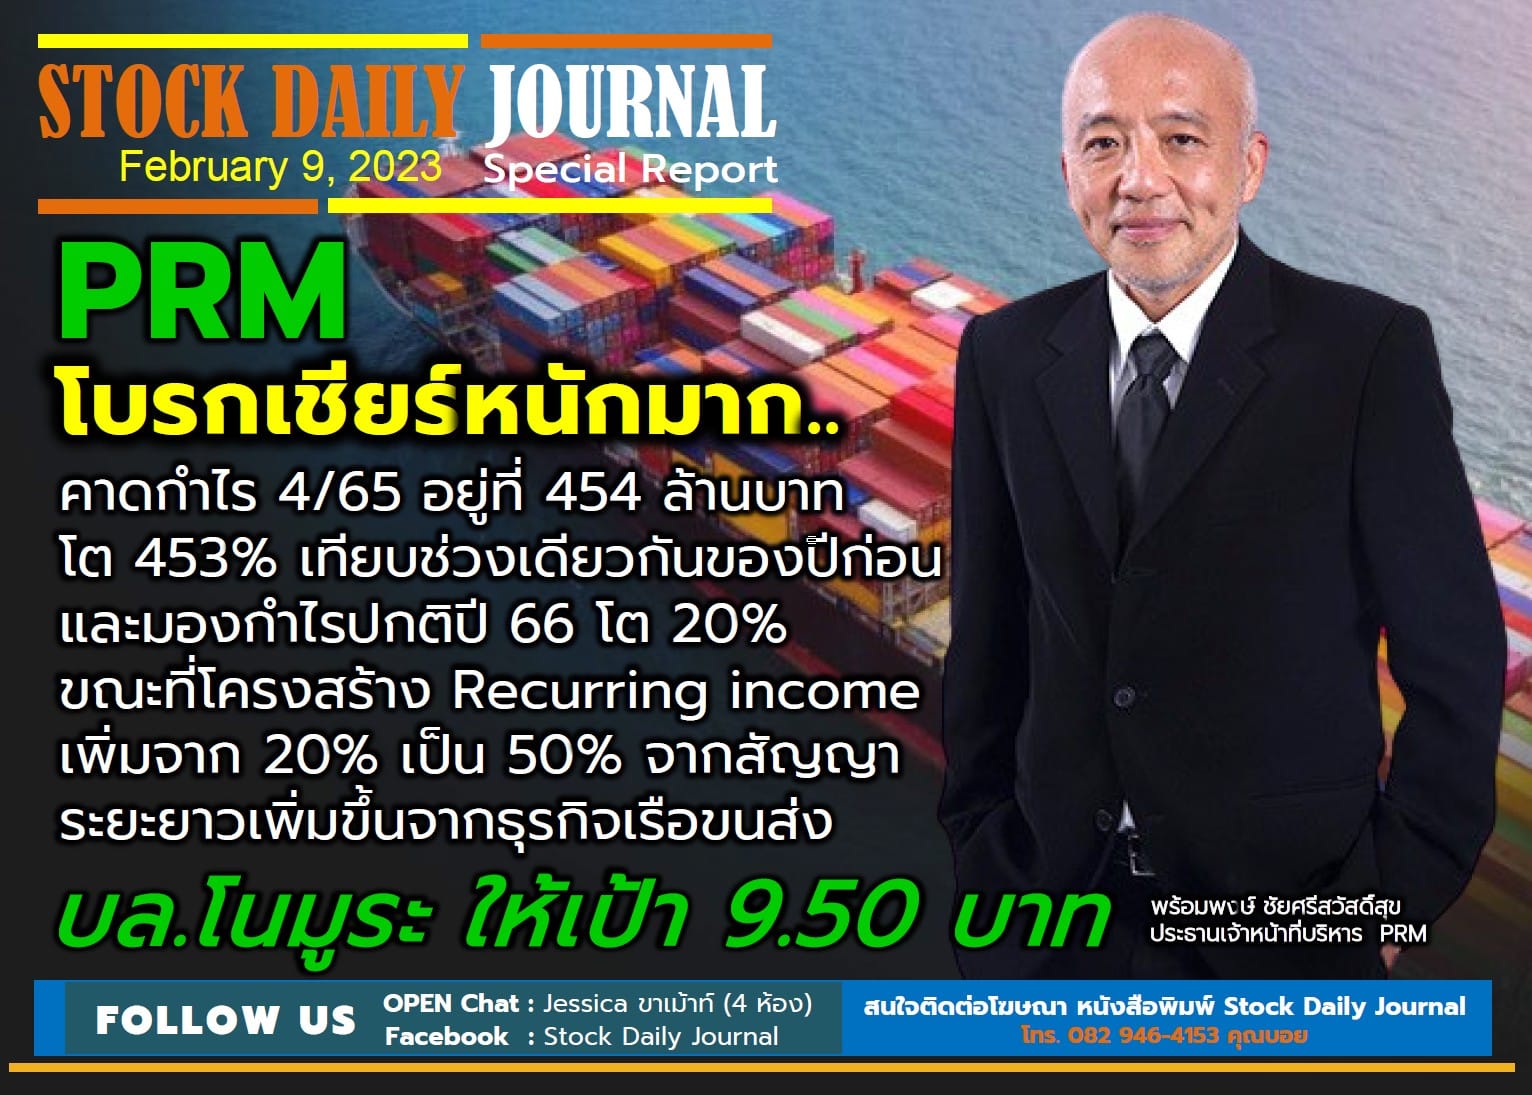 STOCK DAILY JOURNAL “Special Report : PRM”